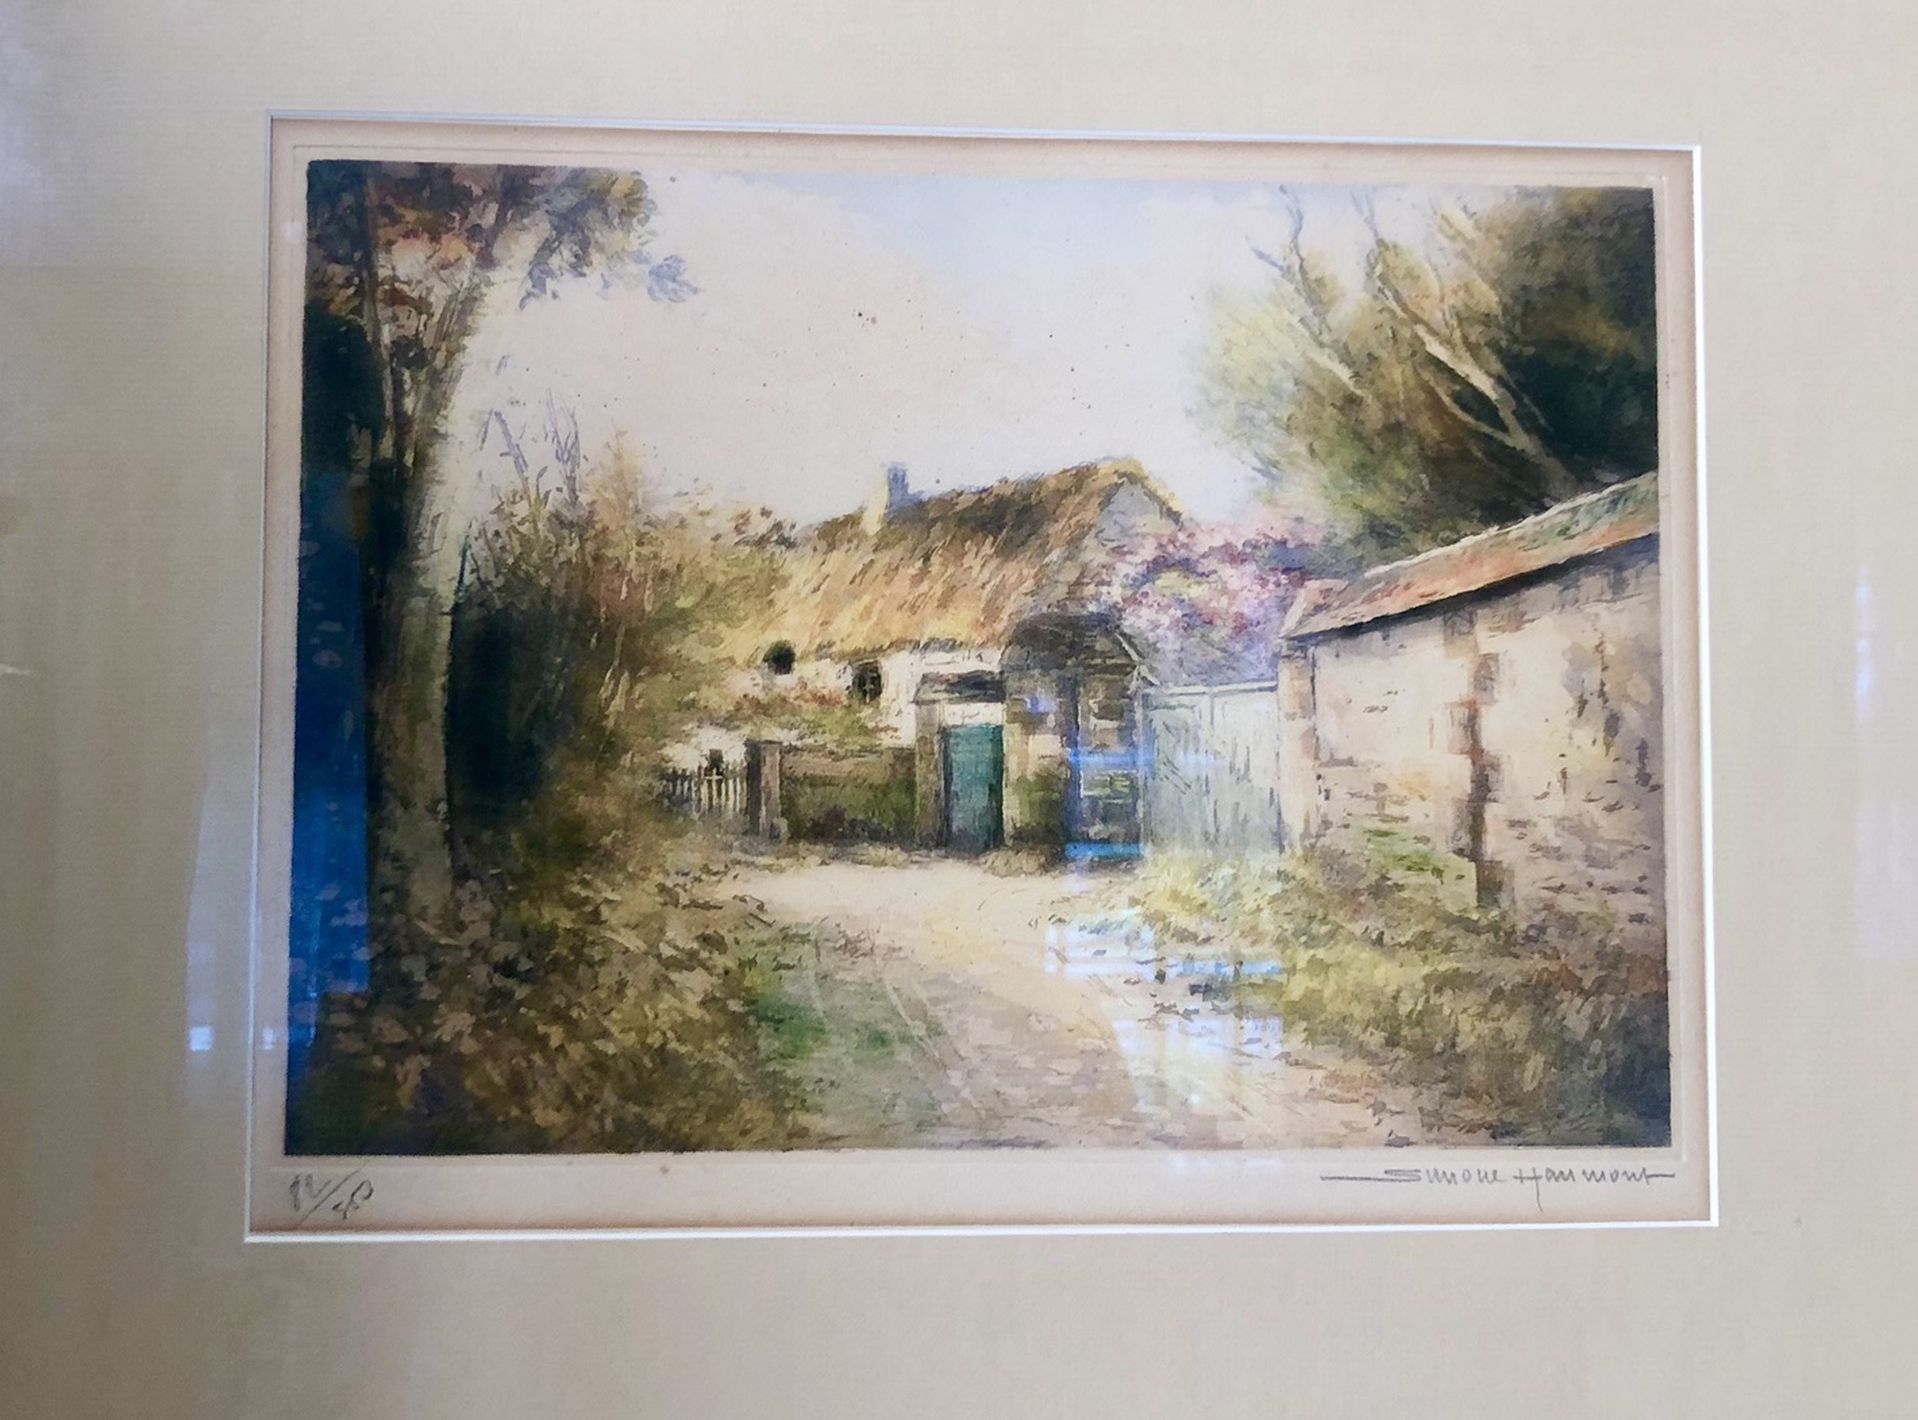 Simone Haumont Landscape Watercolor Signed & Numbered Lithograph Framed 82/250